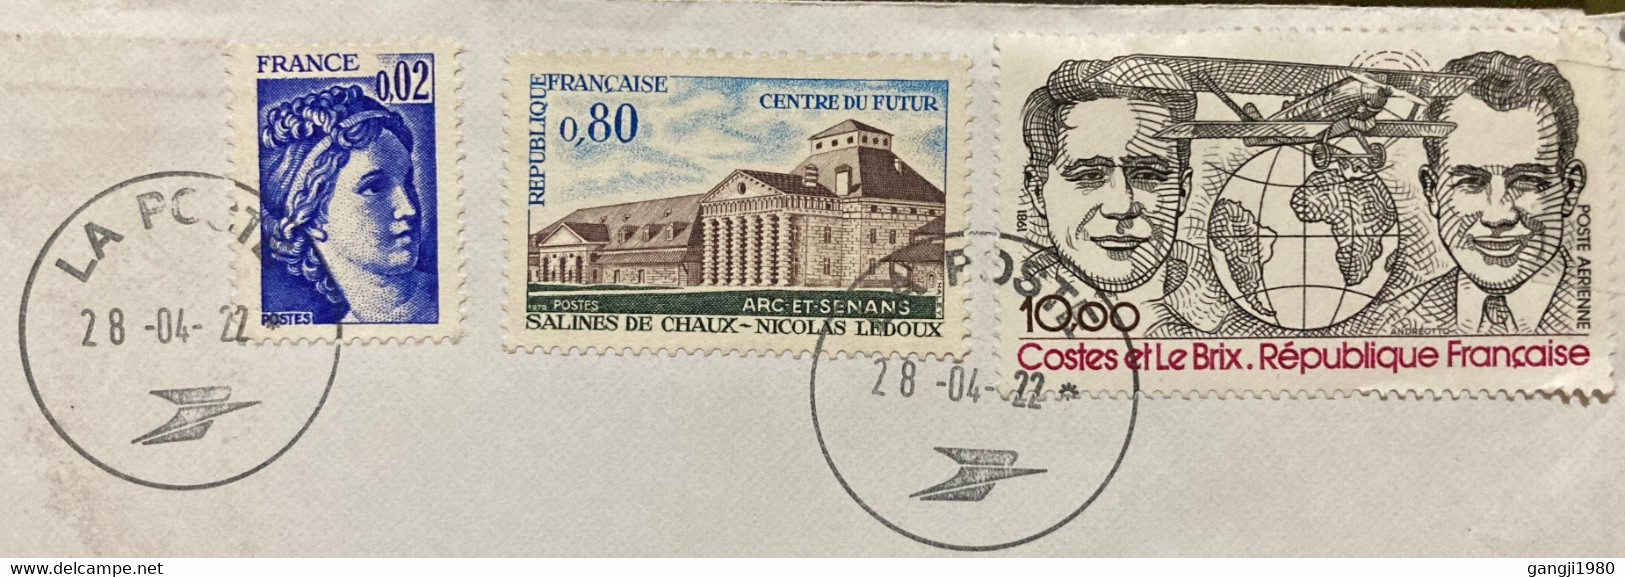 FRANCE 2022, QUEEN,AEROPLANE,GLOBE,BUILDING,ARCHITECTURE,3 STAMPS USED COVER TO INDIA - Covers & Documents